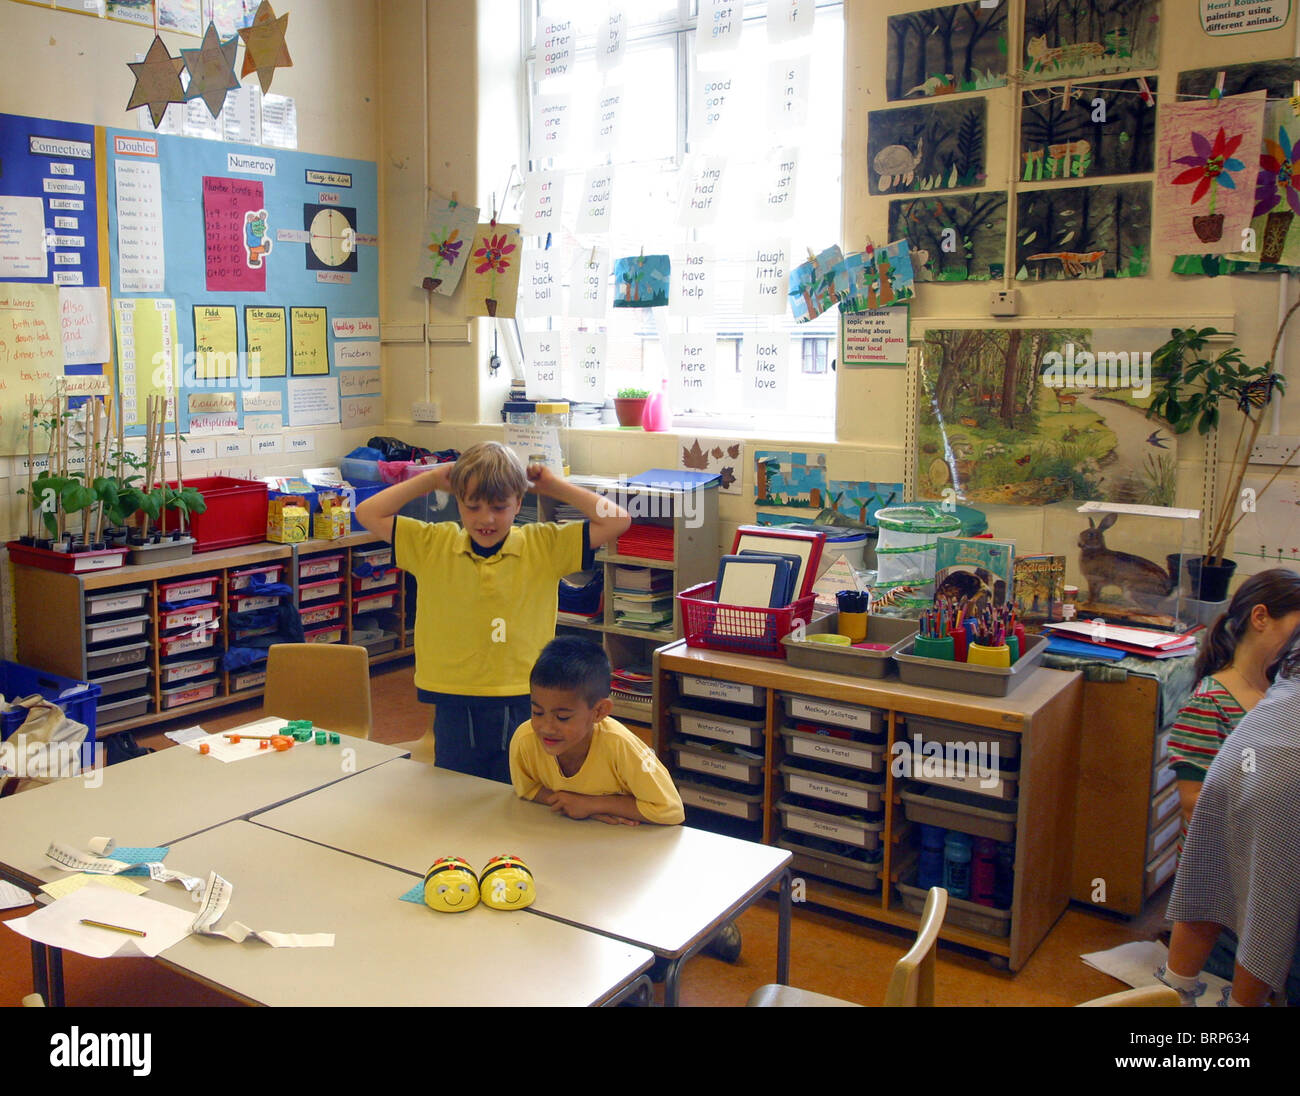 Primary Classroom Scene Showing Artwork Desks Storage Drawers And